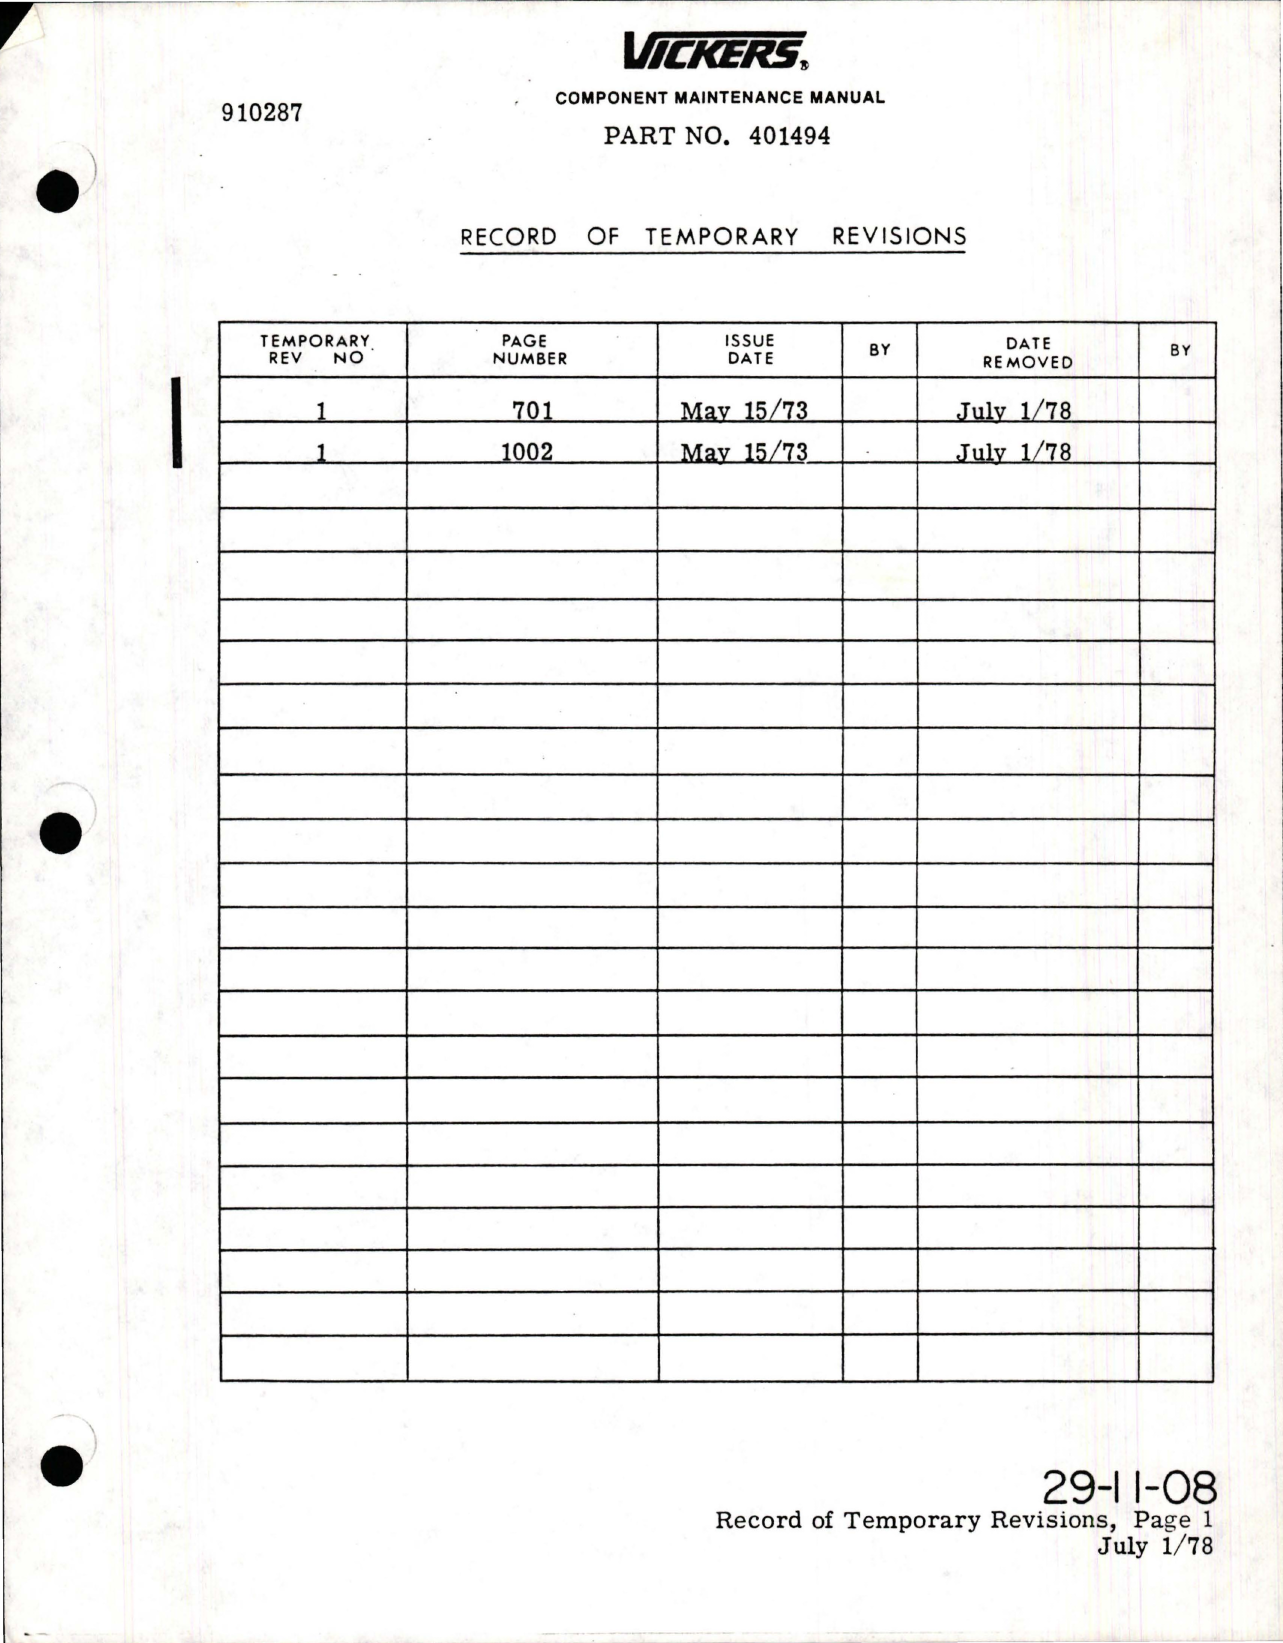 Sample page 5 from AirCorps Library document: Maintenance Manual with Illustrated Parts List for Variable Displacement Hydraulic Motorpump Assembly - Model MPEV3-022-14C, MPEV3-022-14D, and MPEV3-022-14E